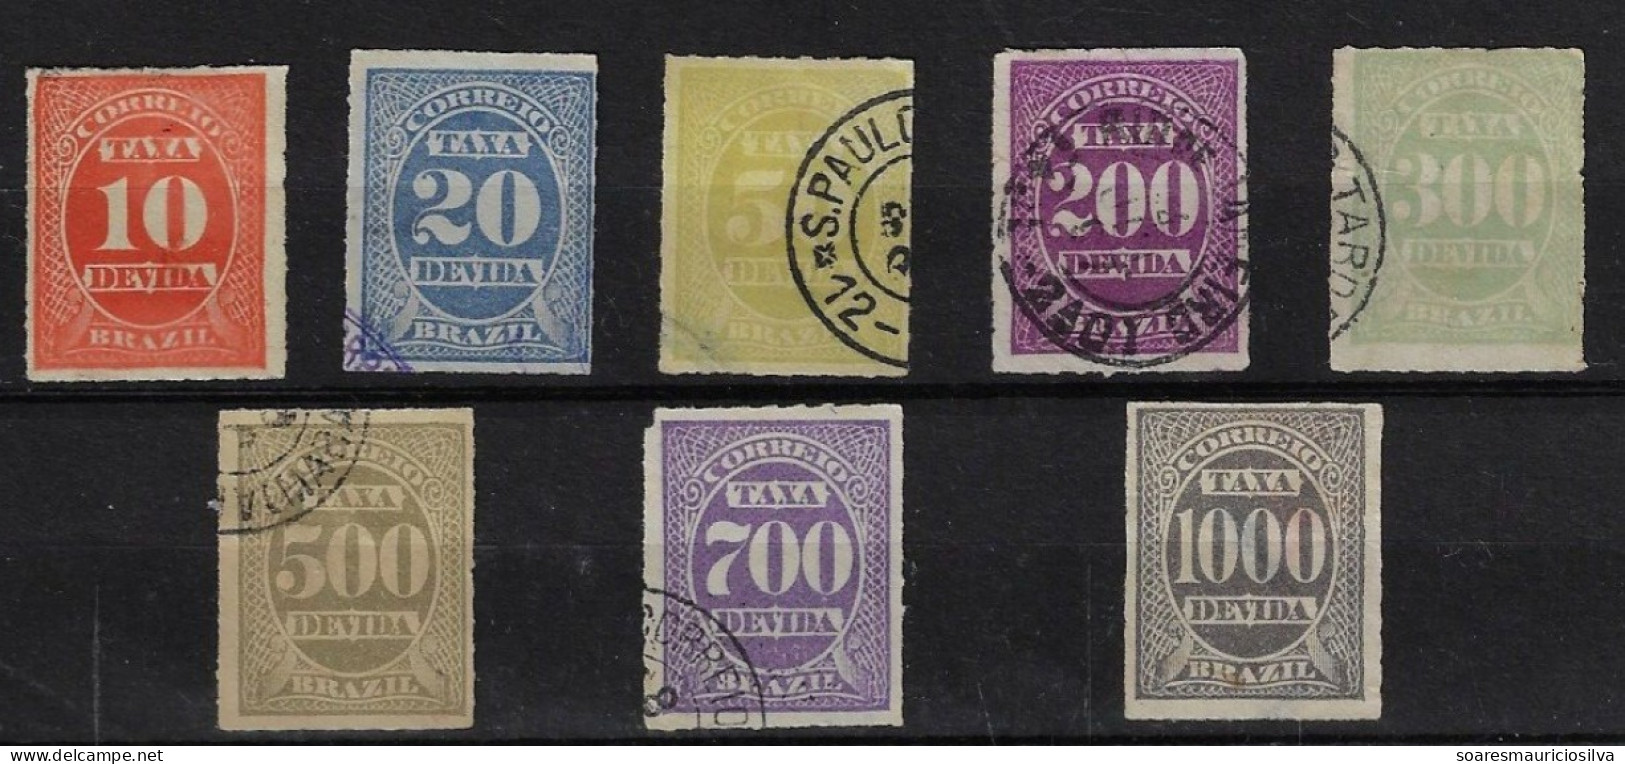 Brazil 1890 Complete Series Postage Due American Bank Note Colors Used & Unused Ink Used In These Stamps Fades In Water - Timbres-taxe